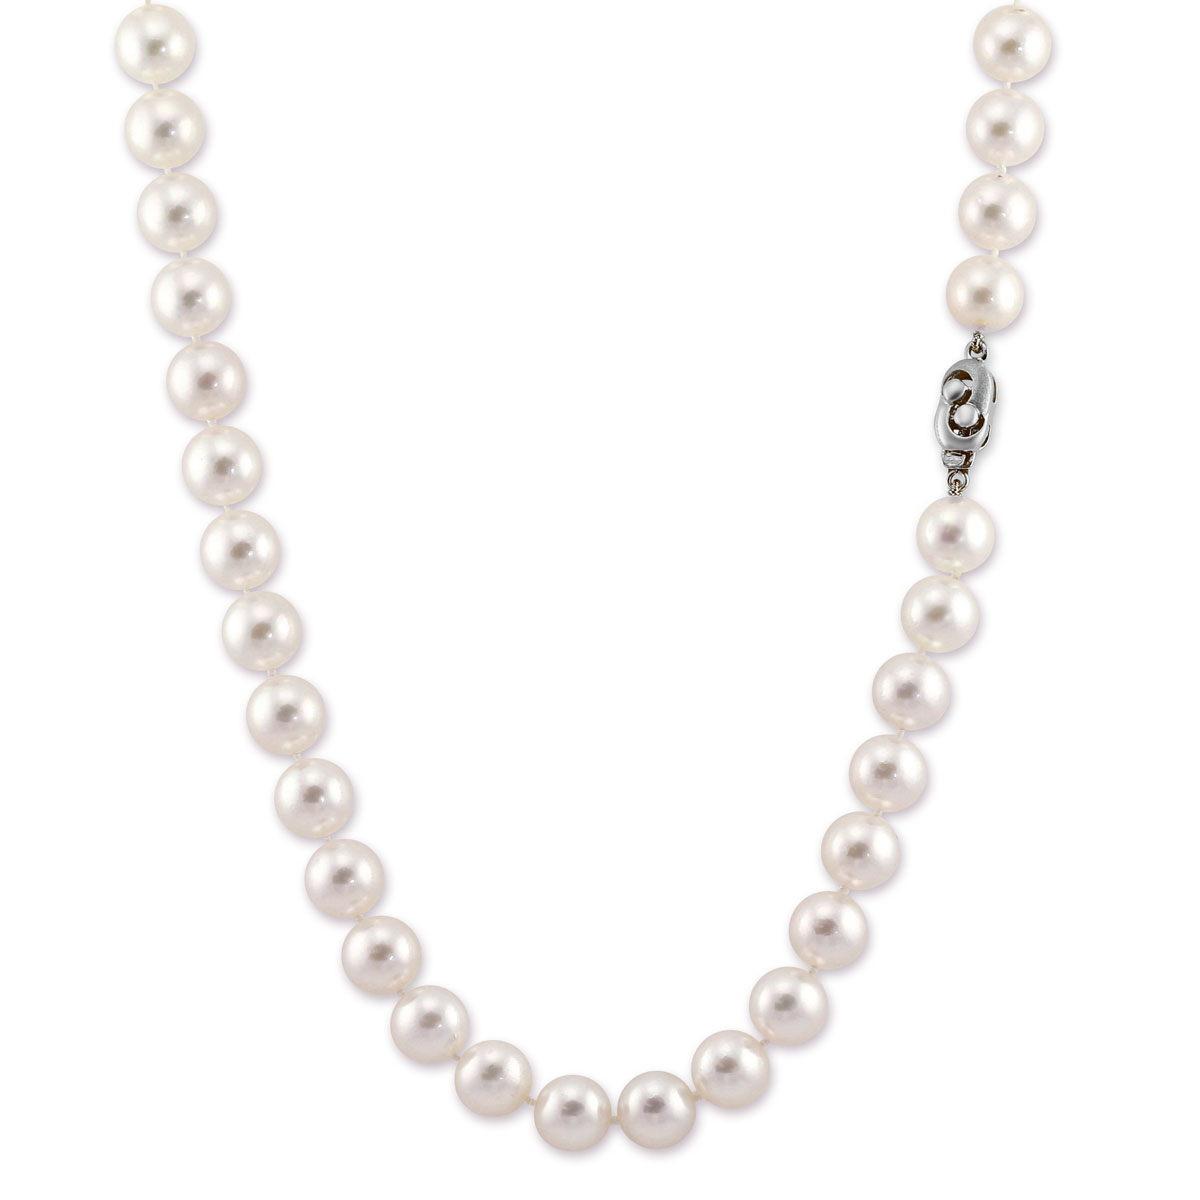 TARA Pearls 6.5x7 mm White Cultured Pearl Strand Necklace in White Gold ...